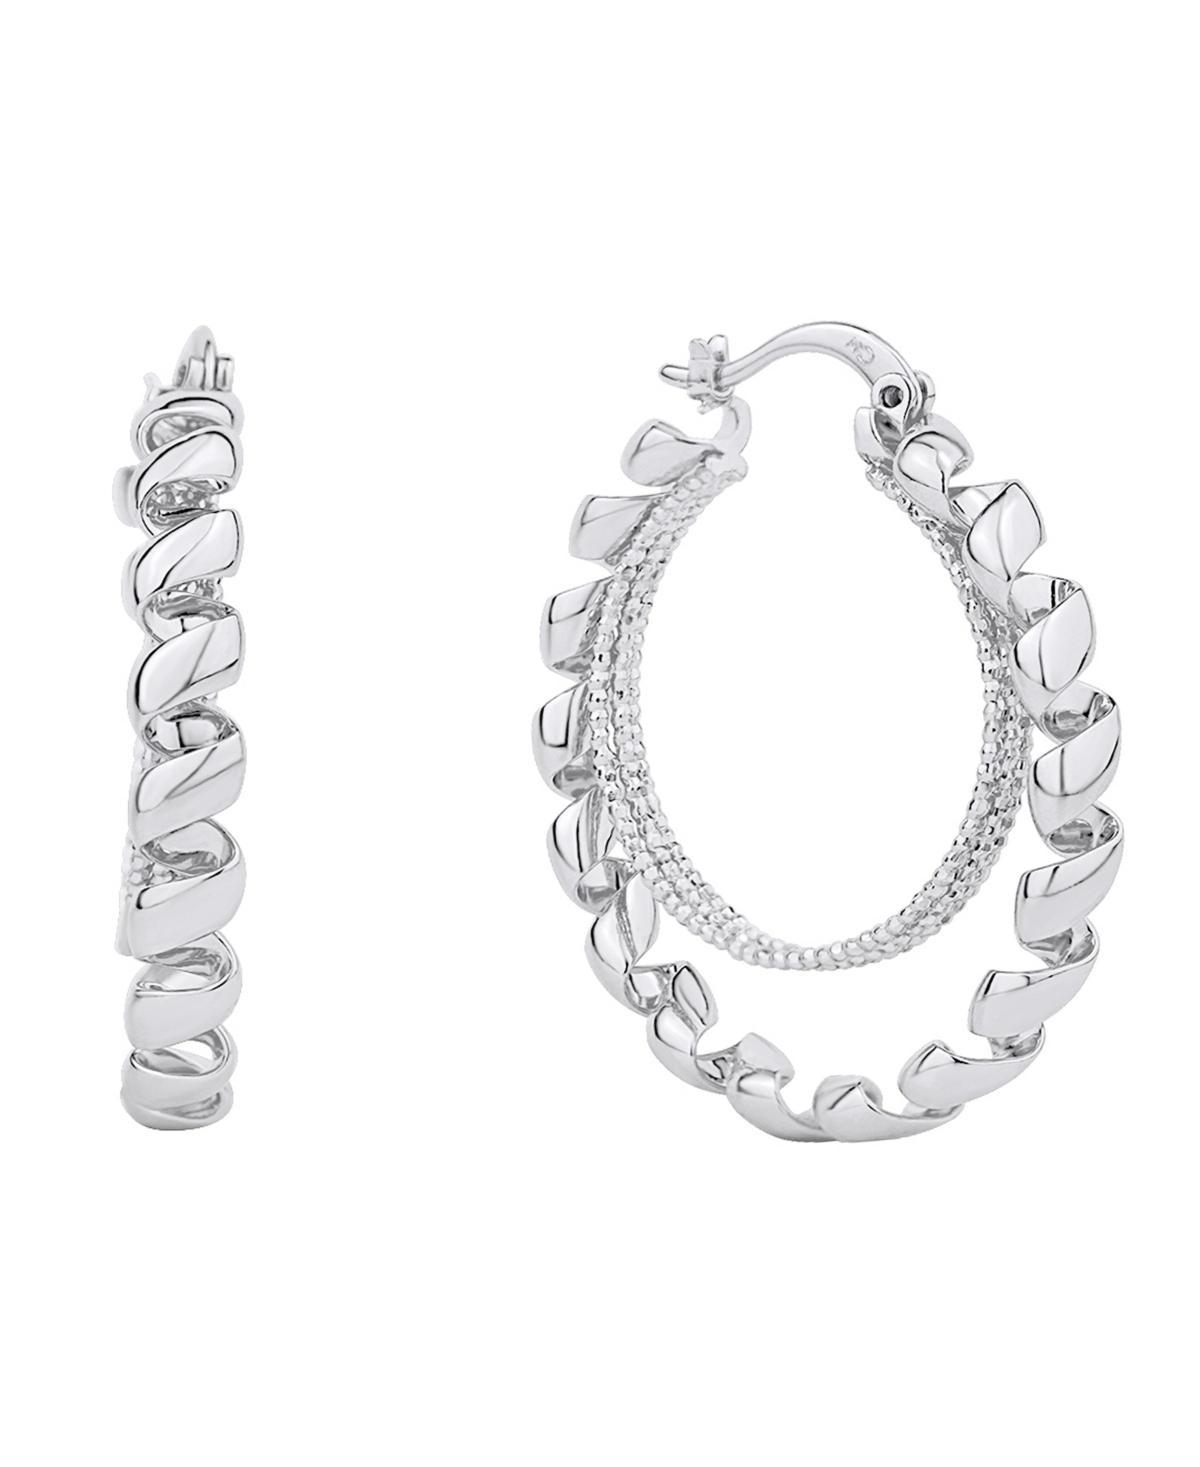 Shop And Now This 18k Gold Plated Or Silver Plated Hoop Earring